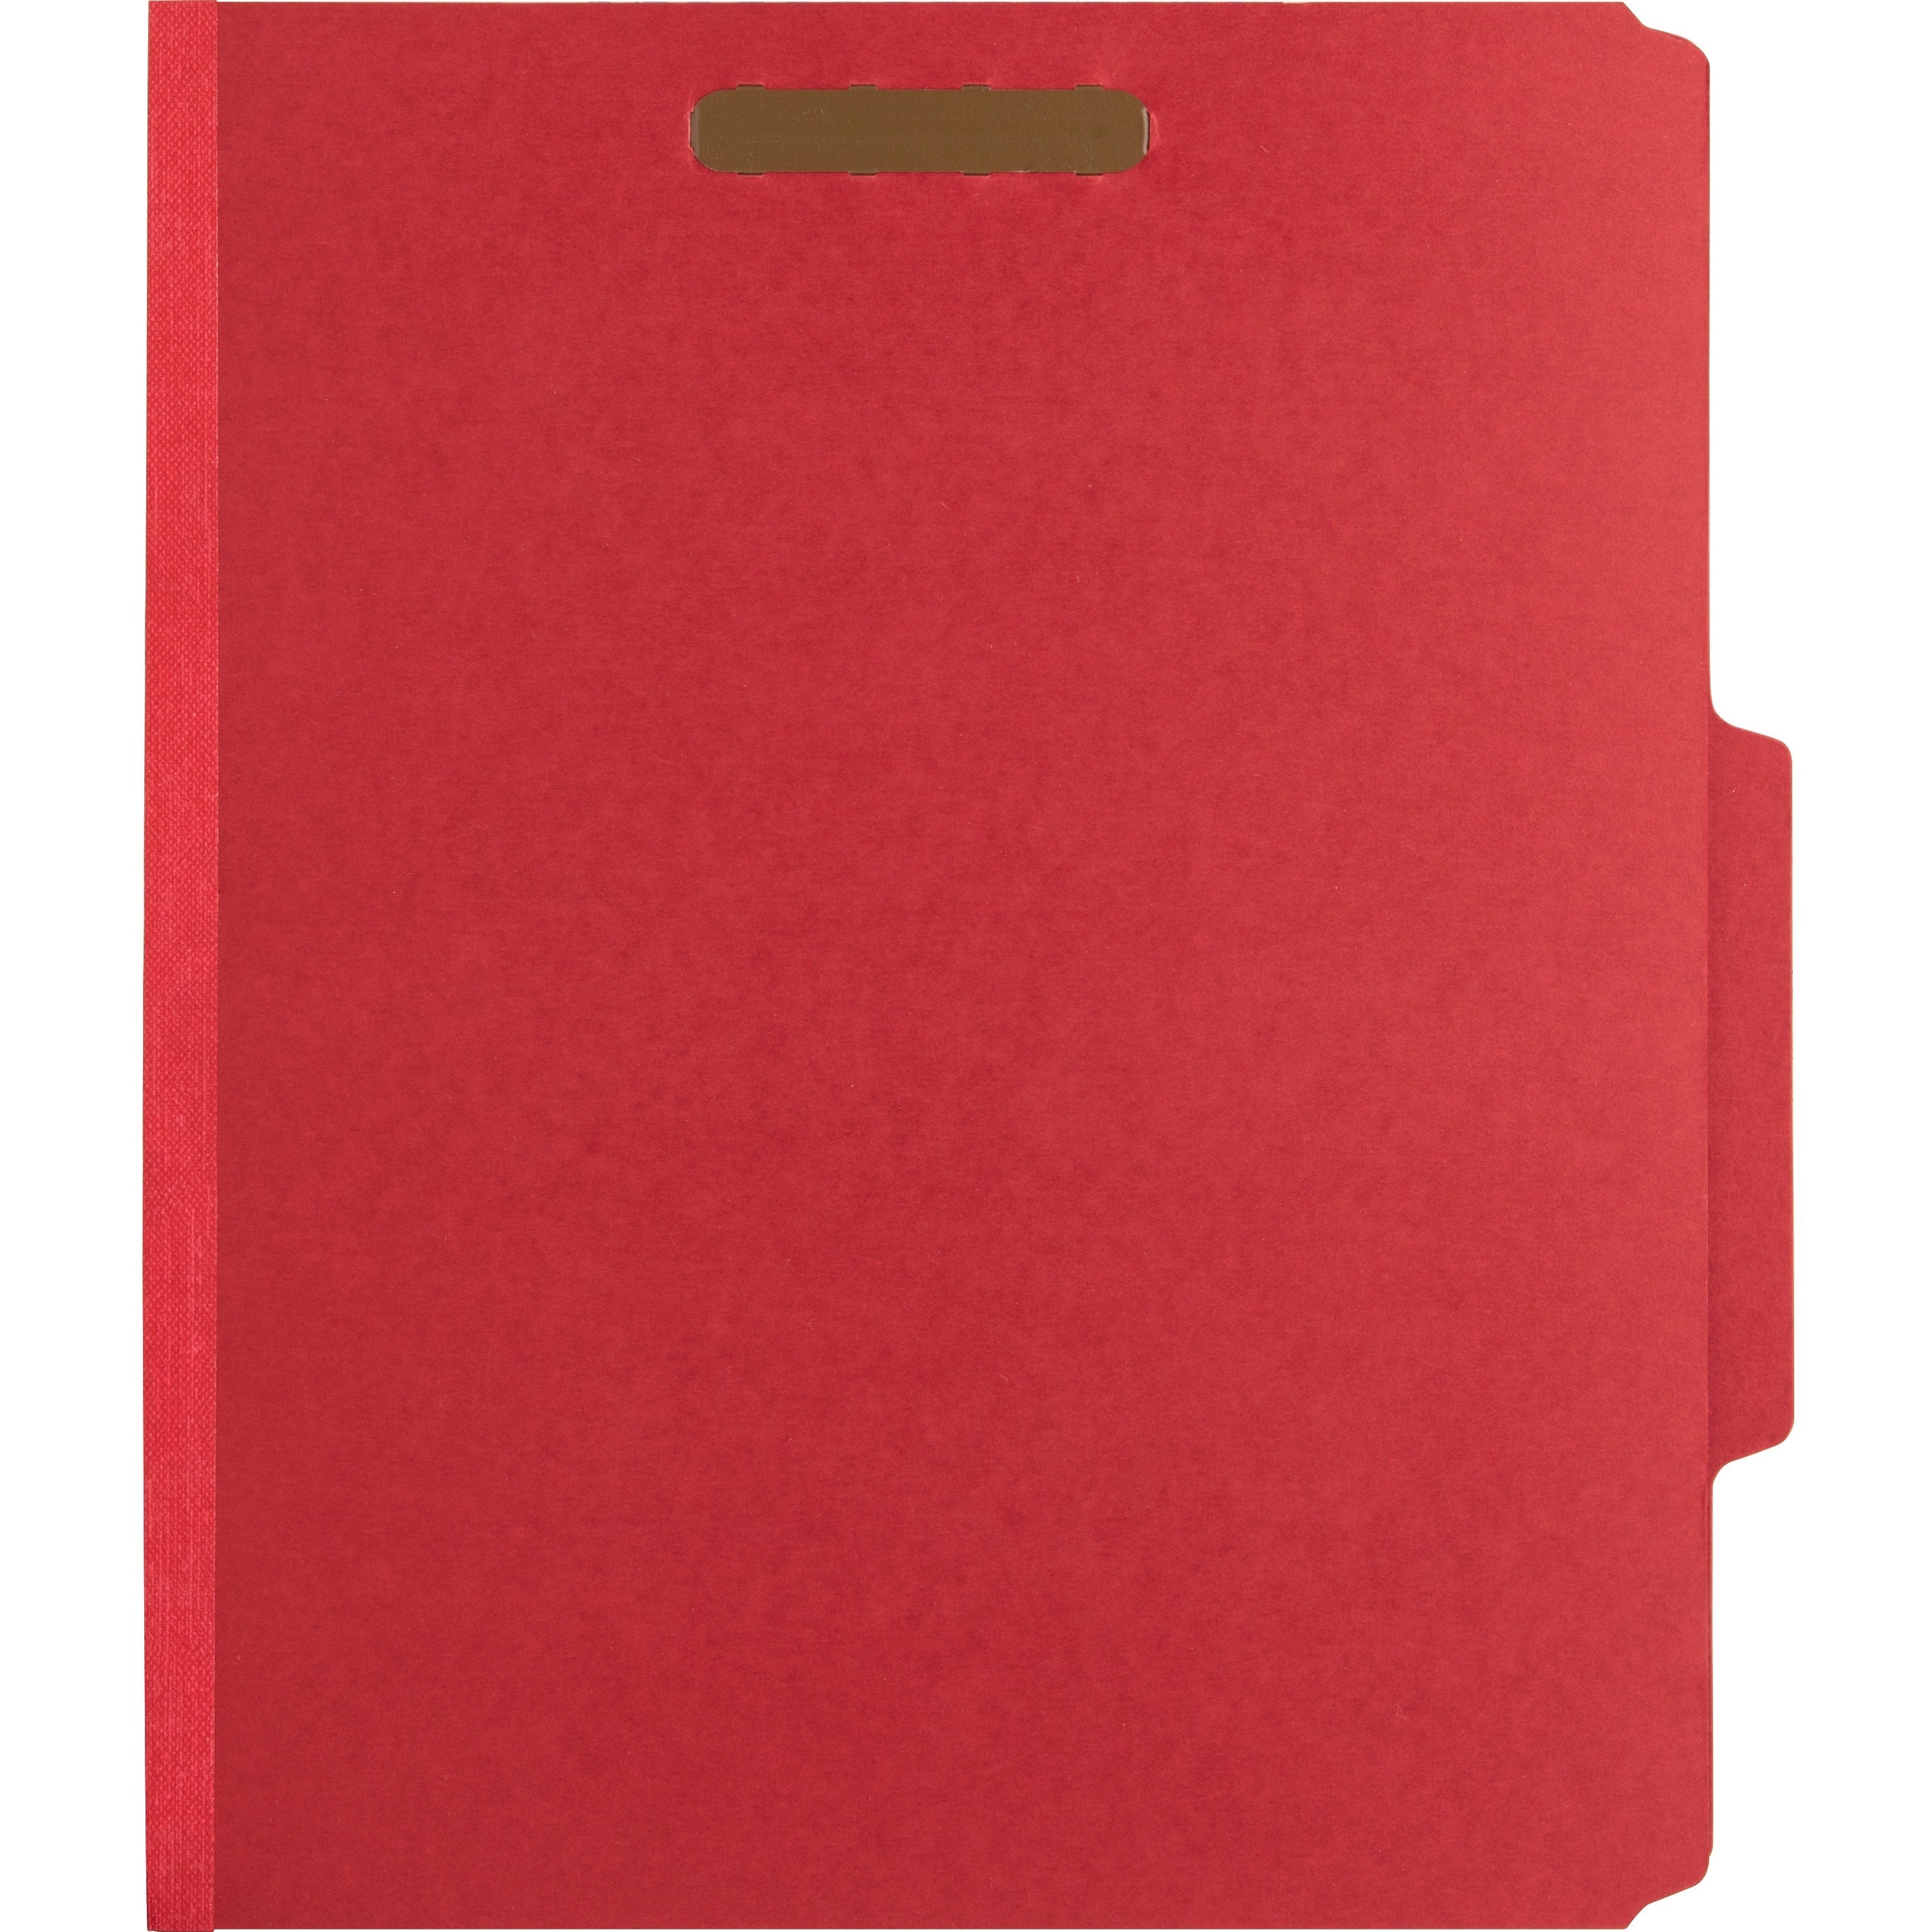 Nature Saver Letter Recycled Classification Folder - 8 1/2" x 11" - 2" Fastener Capacity for Folder - 2 Divider(s) - Red - 100% Recycled - 10 / Box - 